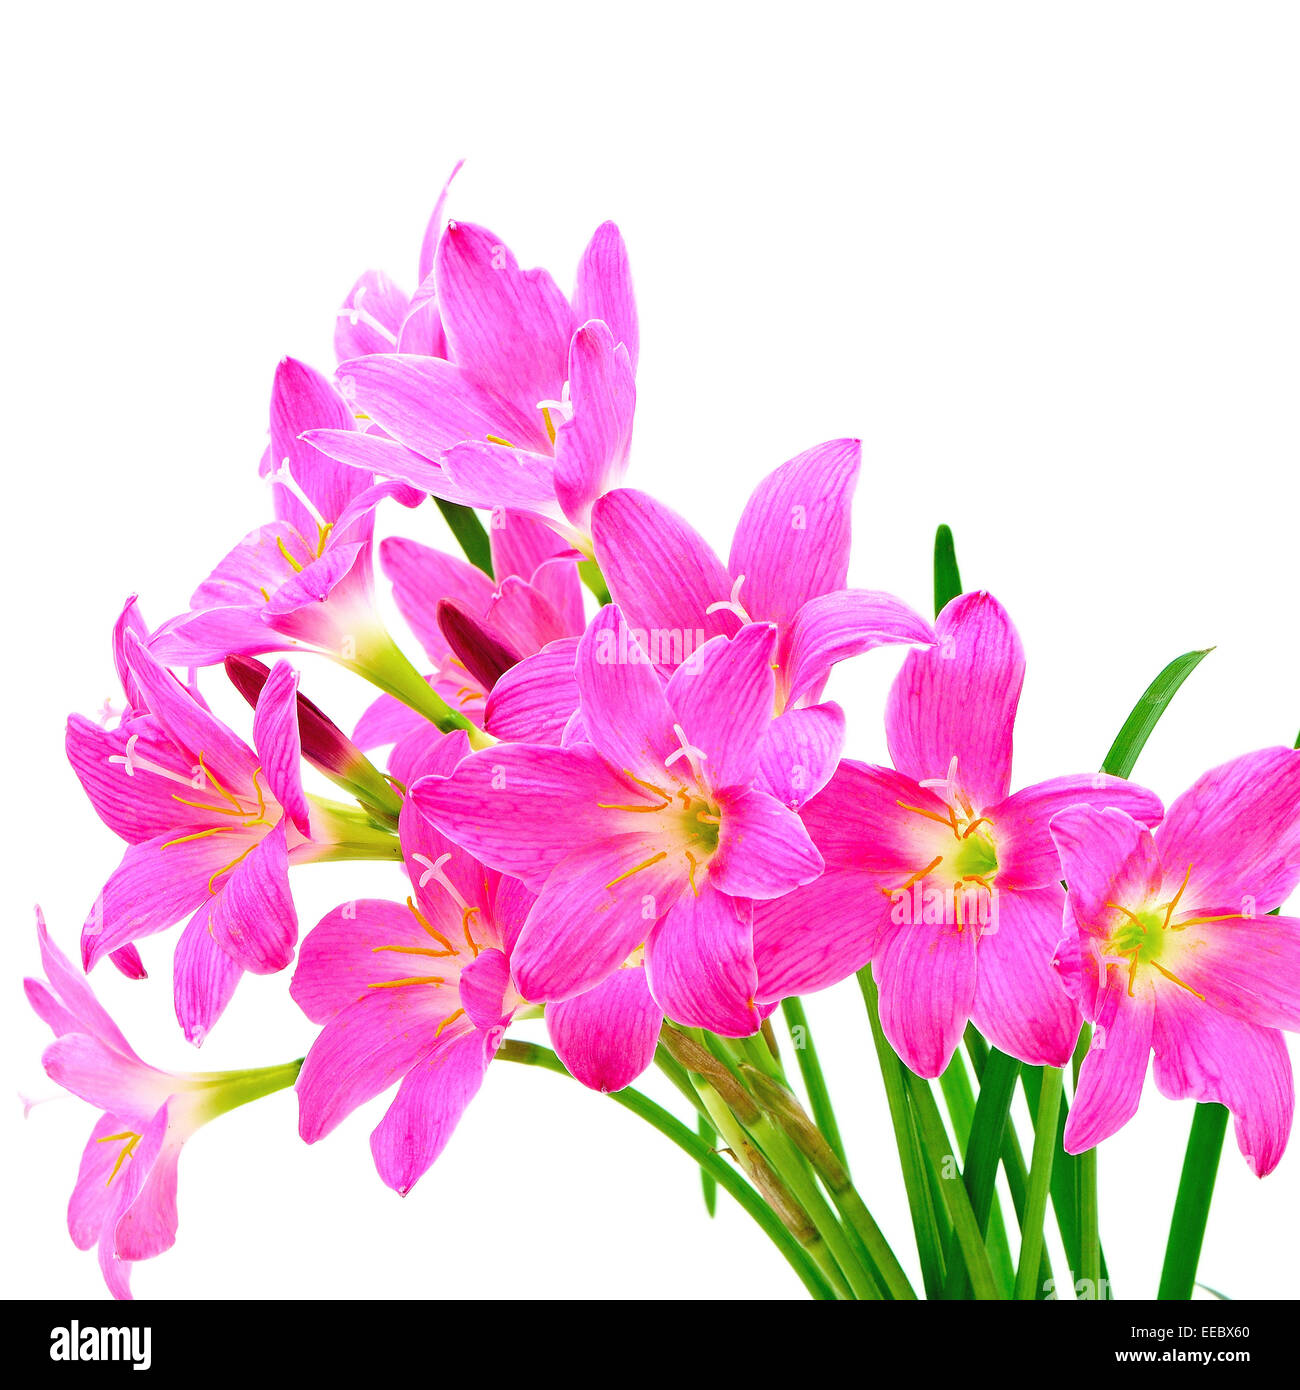 Tropical pink ground flower, Zephyranthes Lily, Rain Lily, Fairy Lily or Little Witches, isolated on a white background Stock Photo